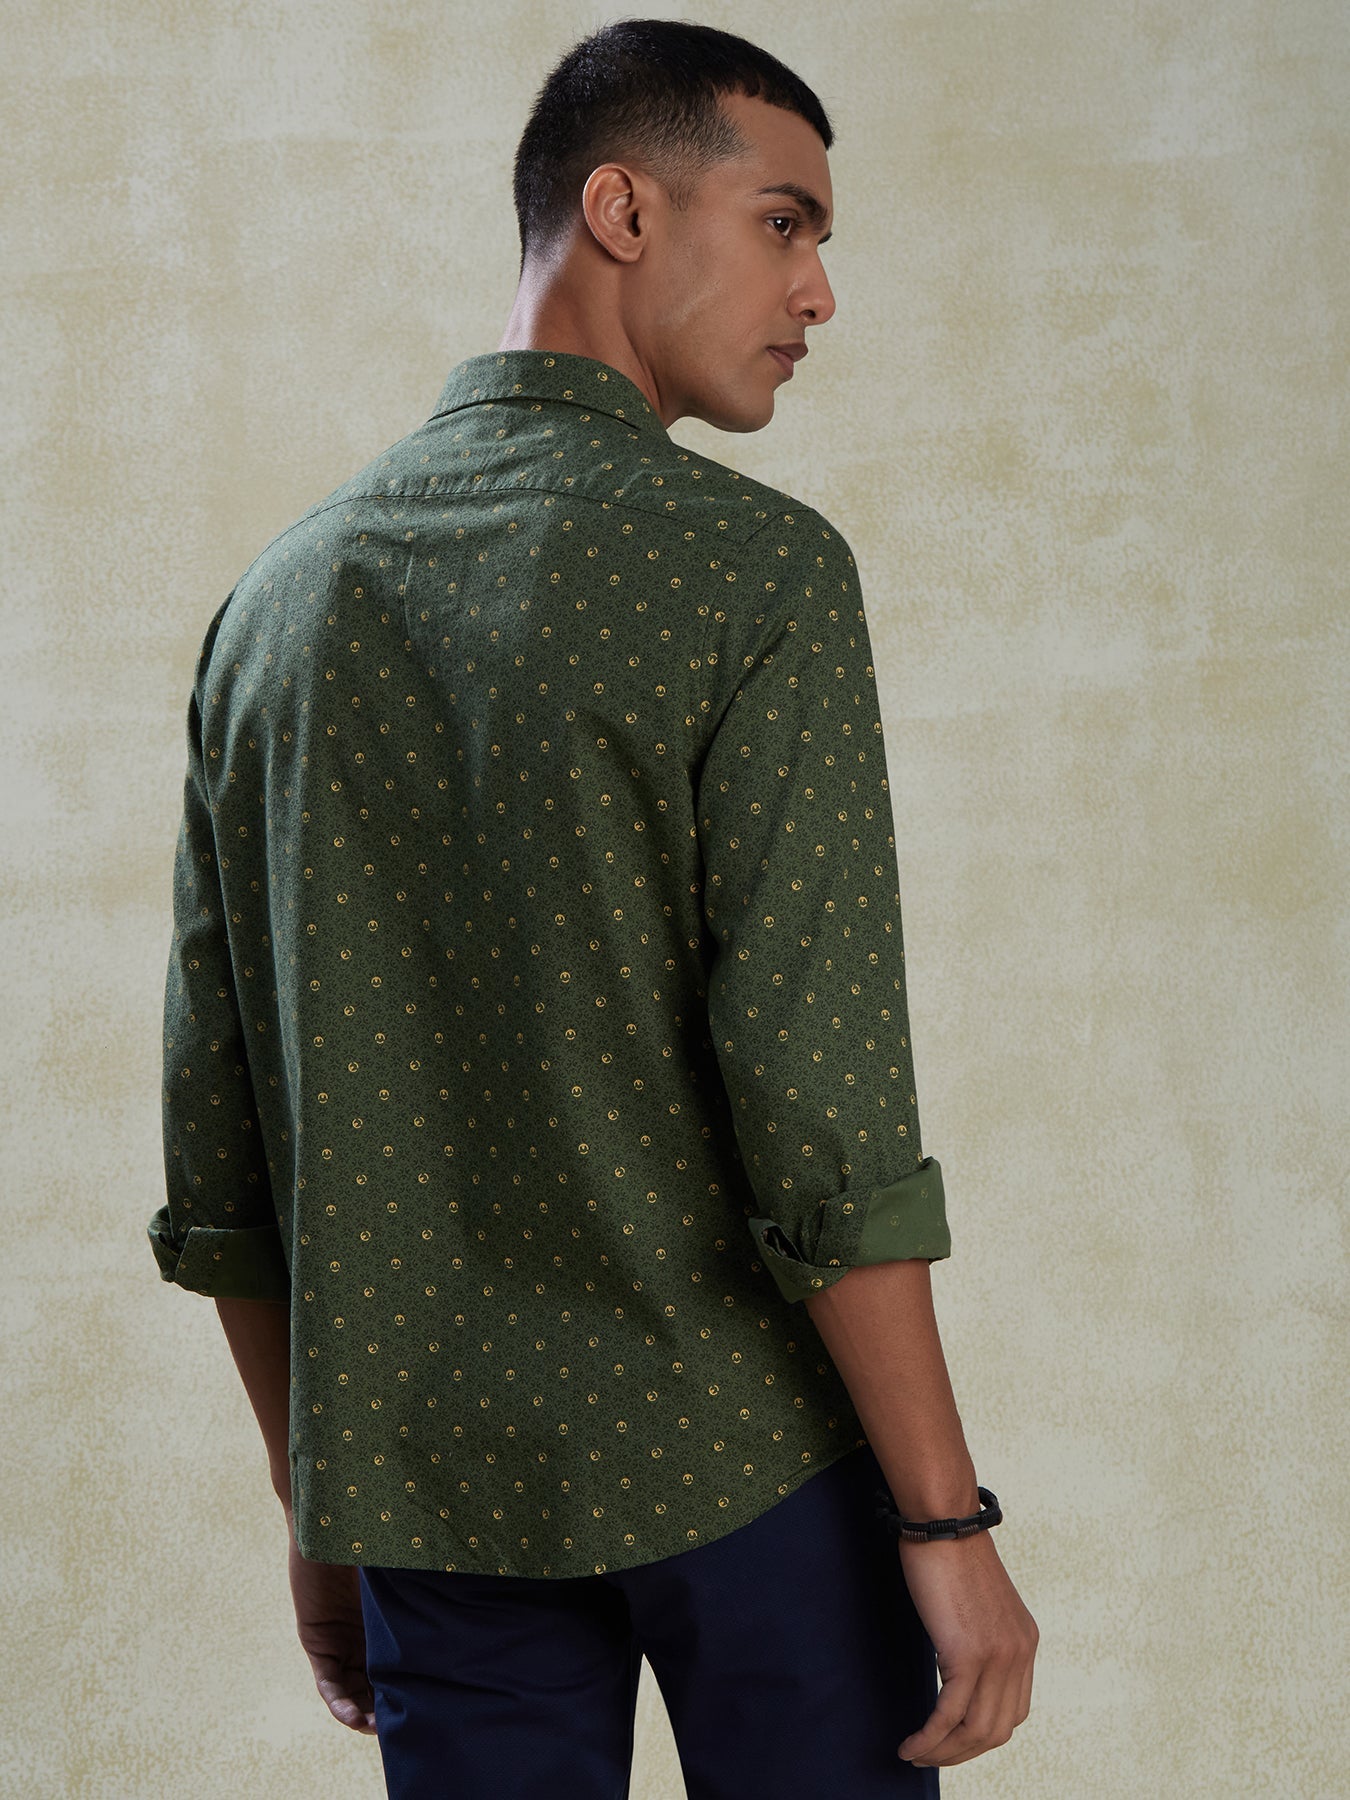 100%-cotton-olive-green-slim-fit-full-sleeve-casual-mens-shirts